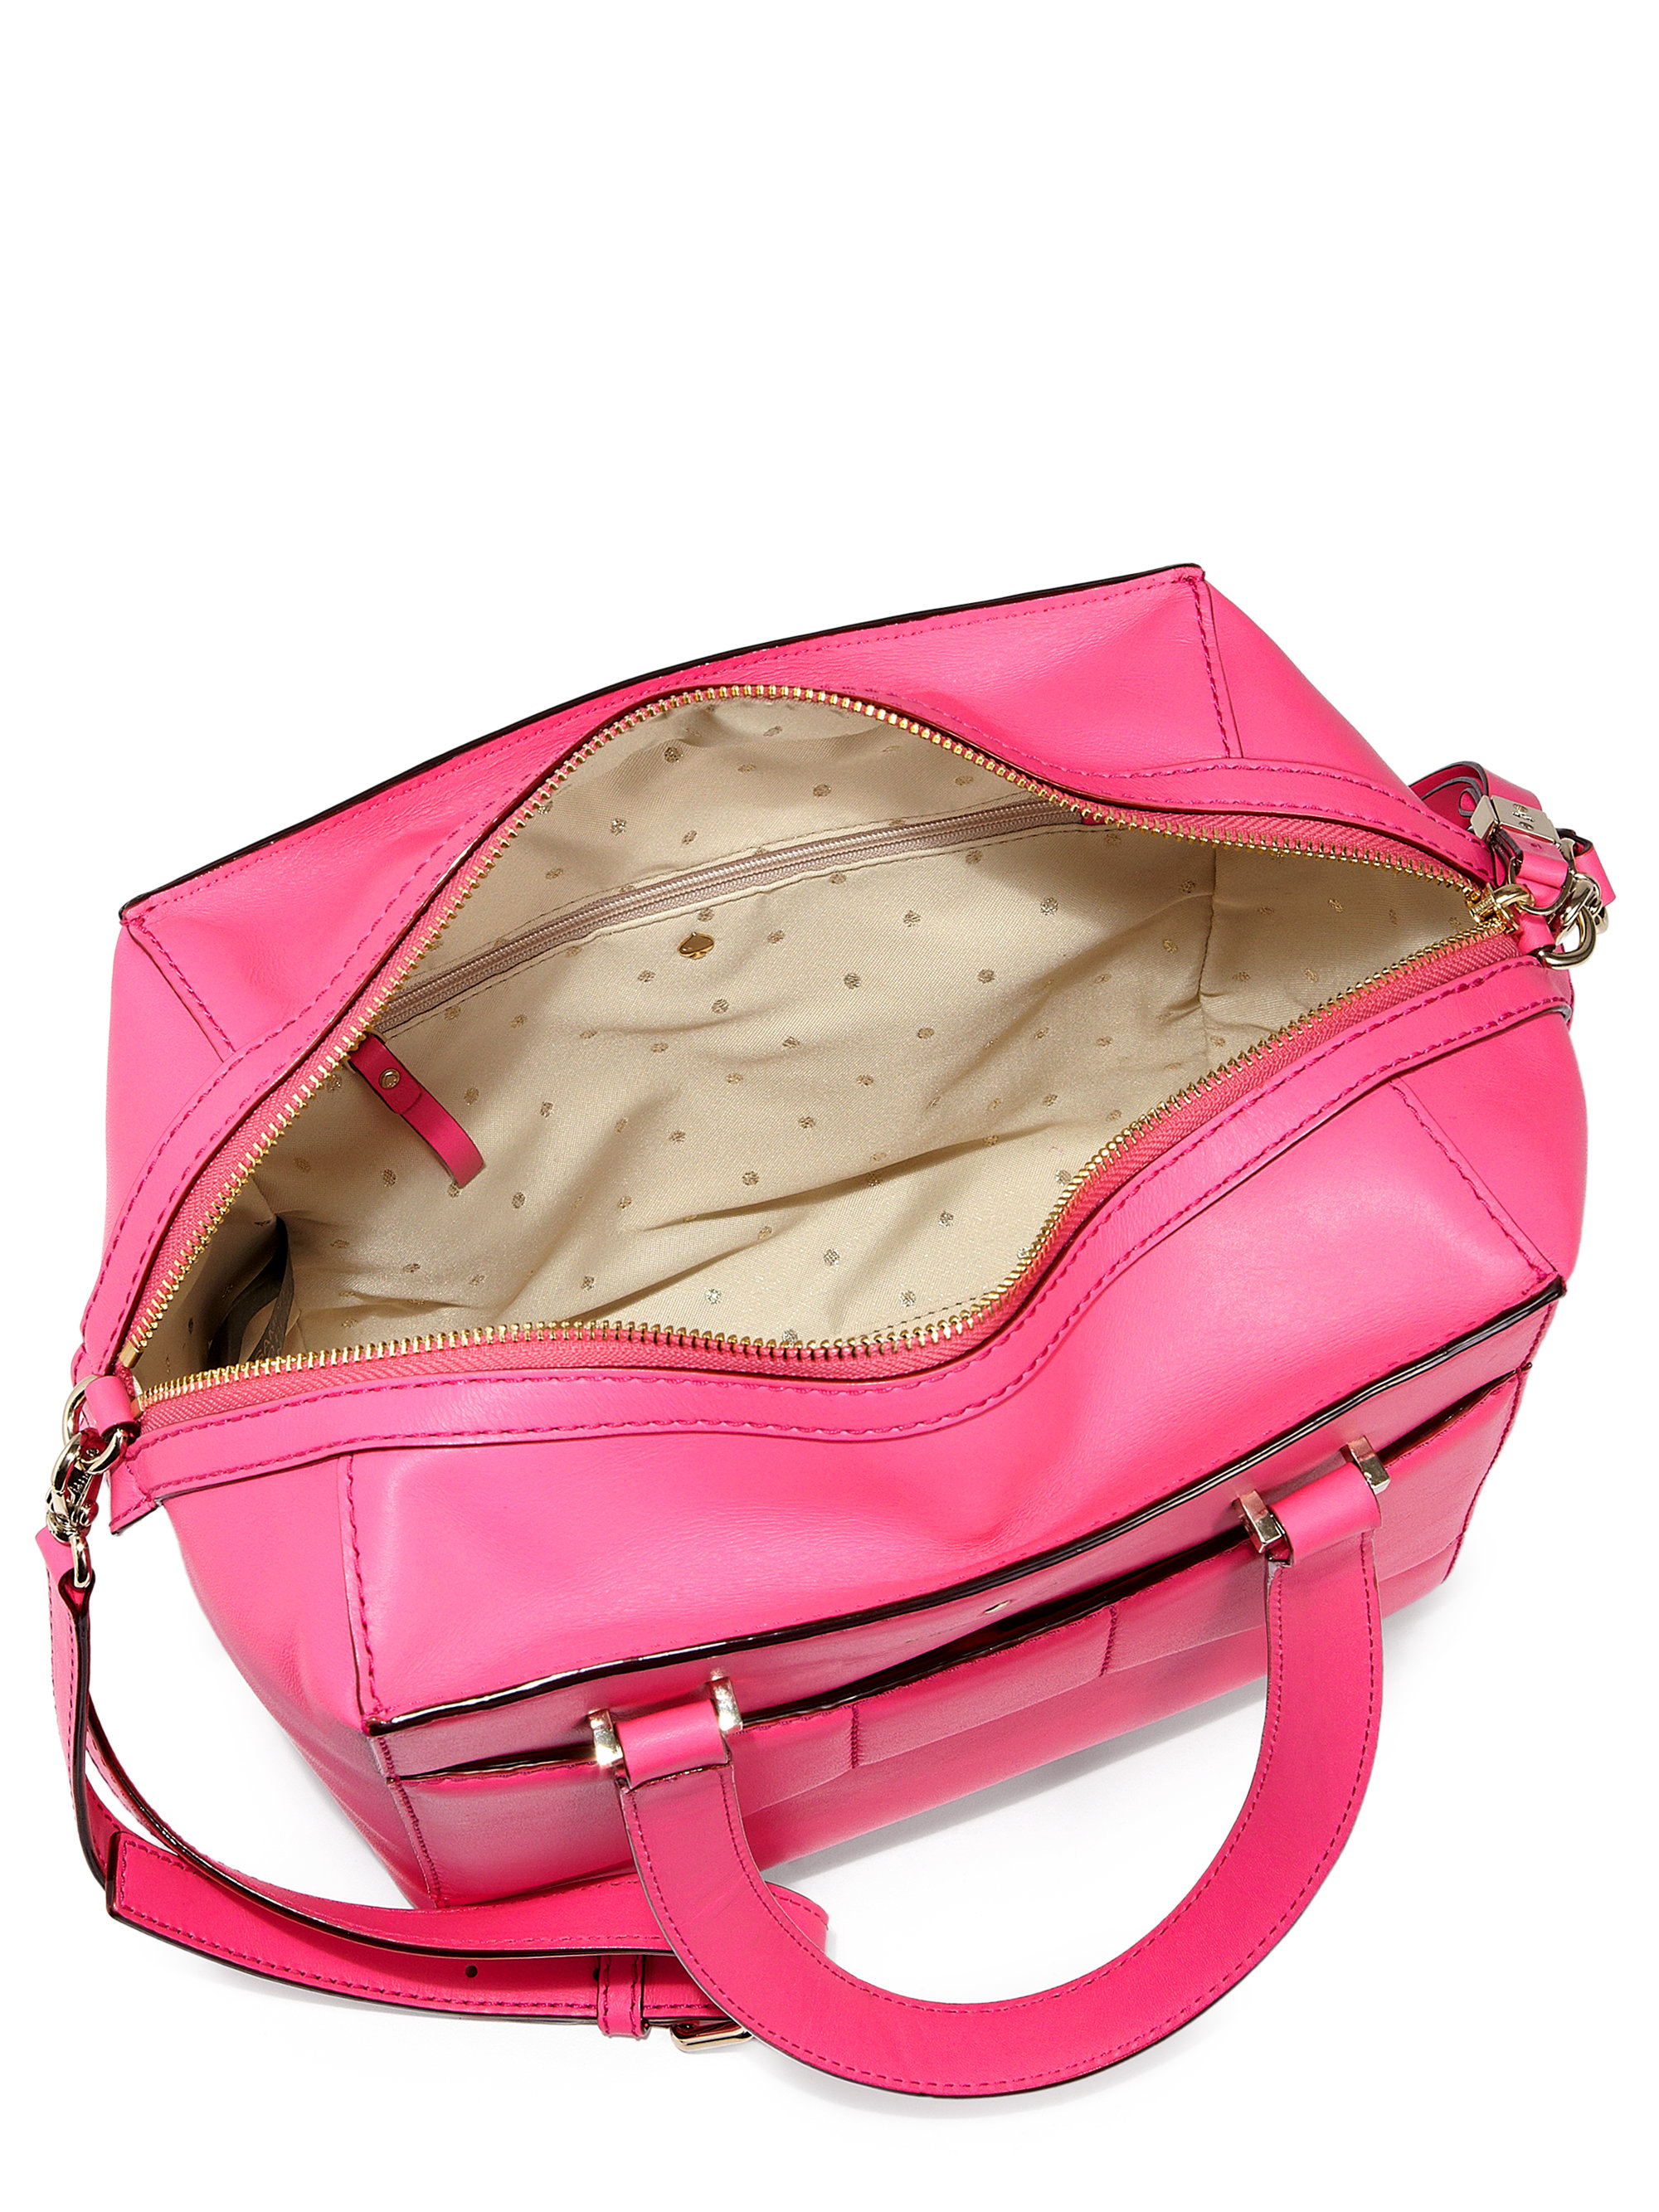 Lyst - Kate spade new york Bow Leather Satchel in Pink